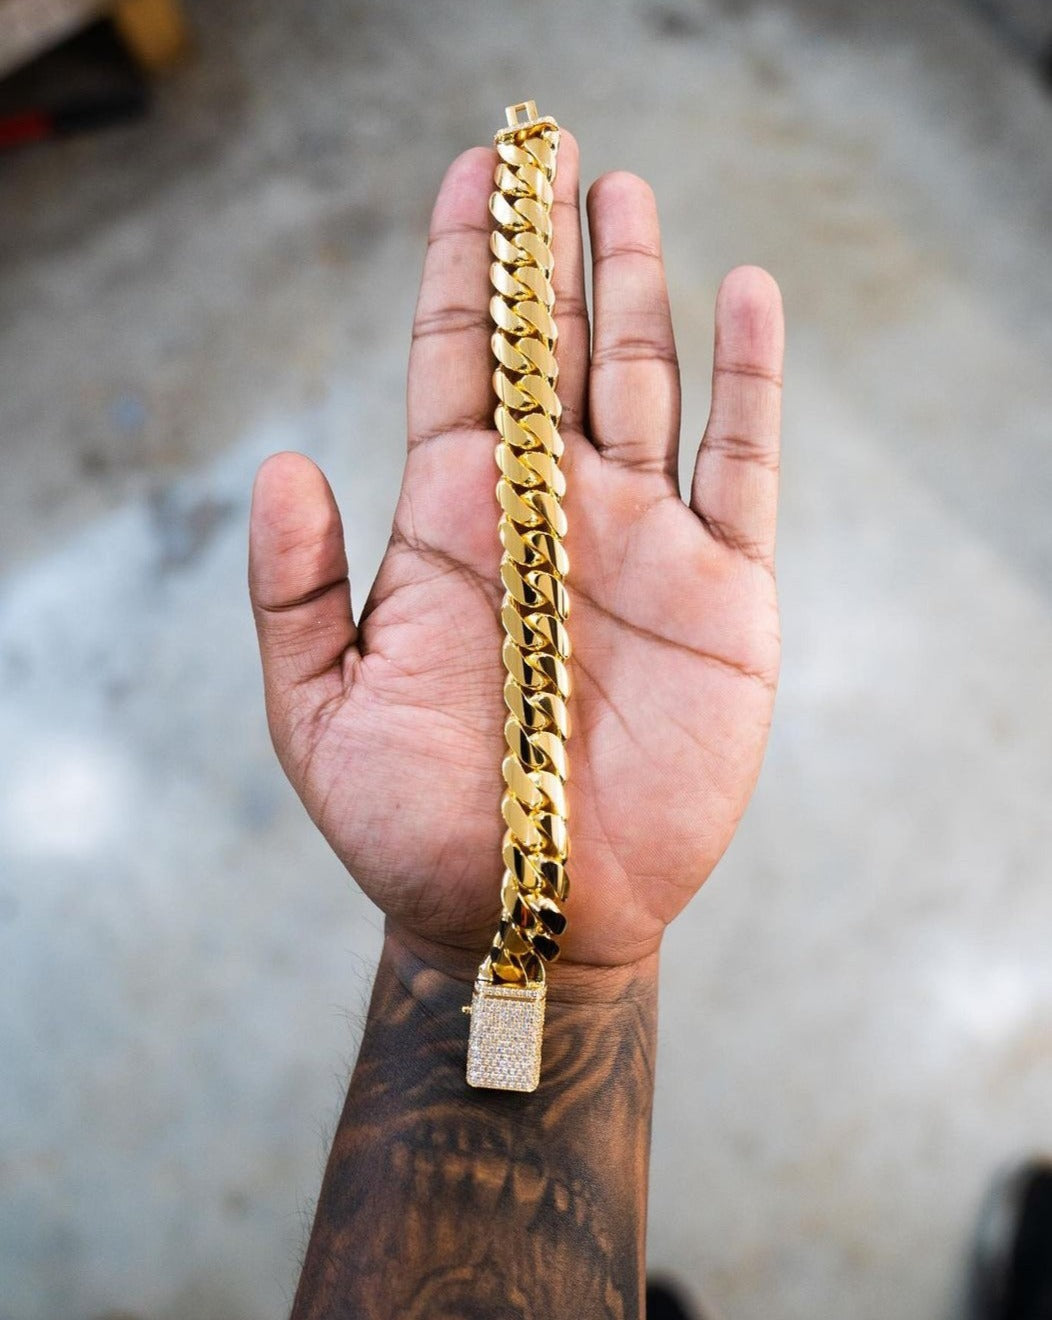 RARE PRINCE by CARAT SUTRA | Solid 16mm Miami Cuban Link Bracelet with Iced Lock | 22kt Gold Micron Plated on 925 Sterling Silver Bracelet with AAA+ Quality Swarovski Diamonds | Men's Jewelry | With Certificate of Authenticity and 925 Hallmark - caratsutra